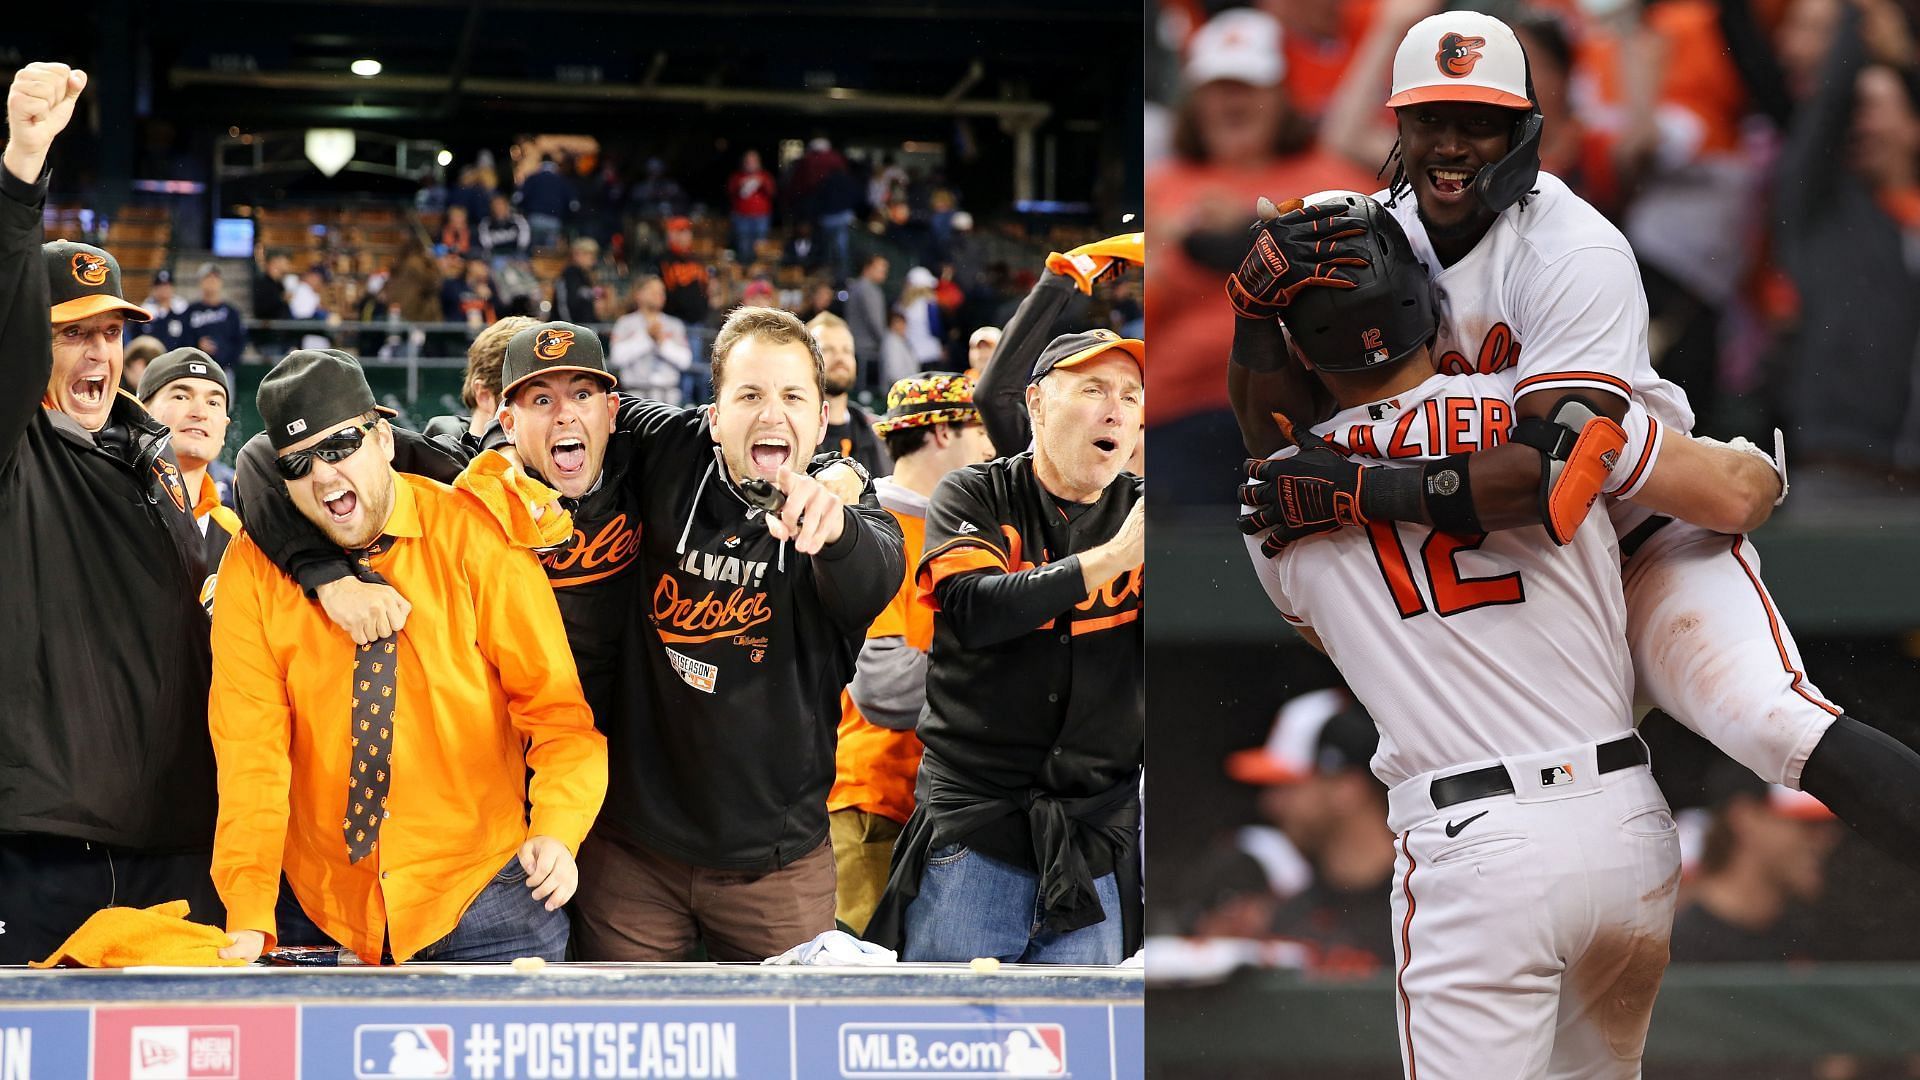 Twitter map shows Orioles have most rooting interest in division series